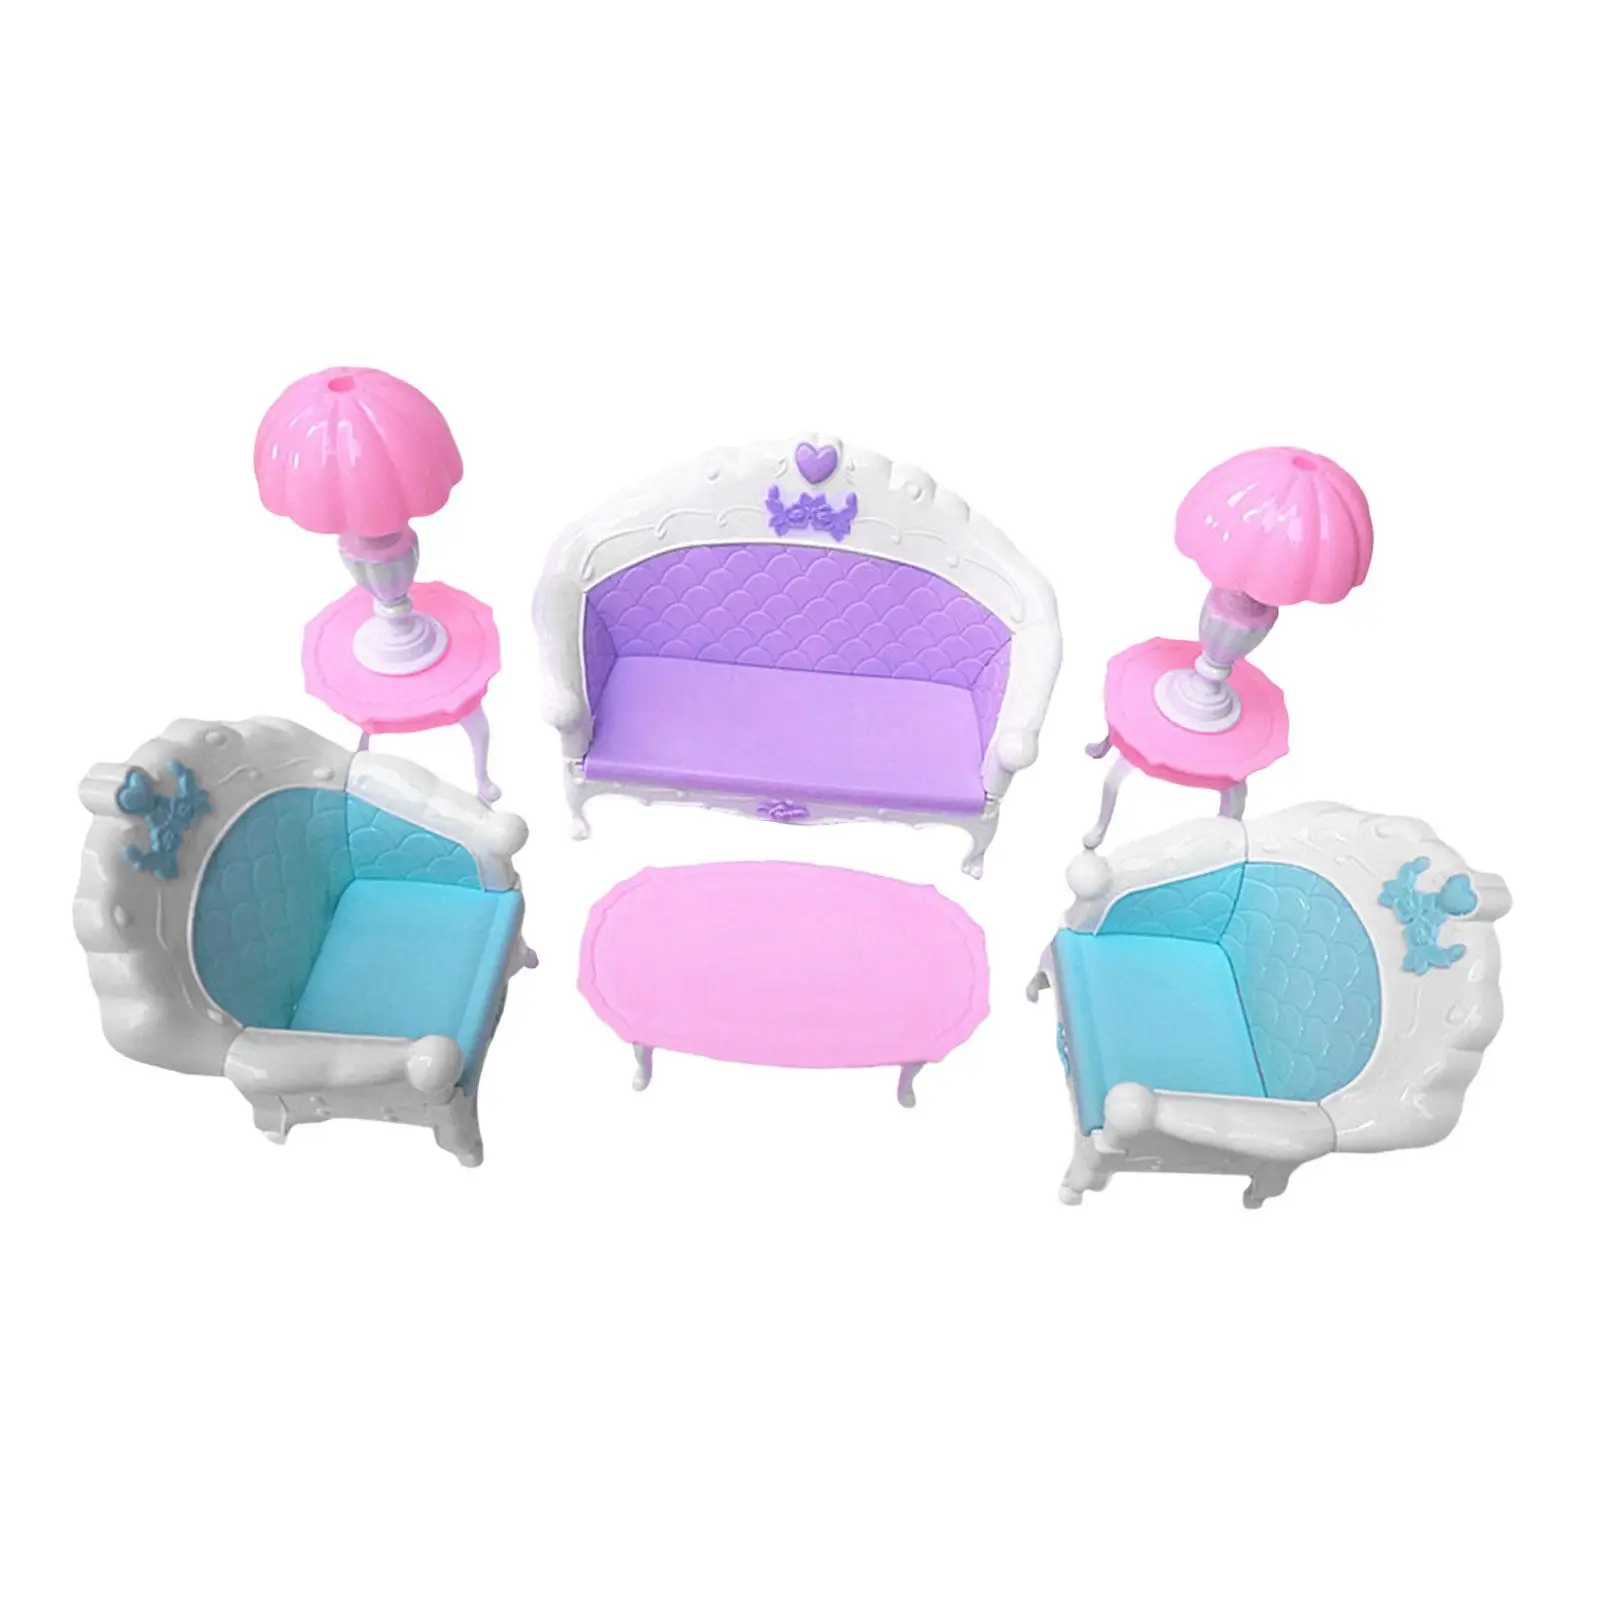 Doll Furniture Accessories Mini Dollhouse Living Room Miniature Sofa and Table Miniature House Furnishings for Doll Decoration